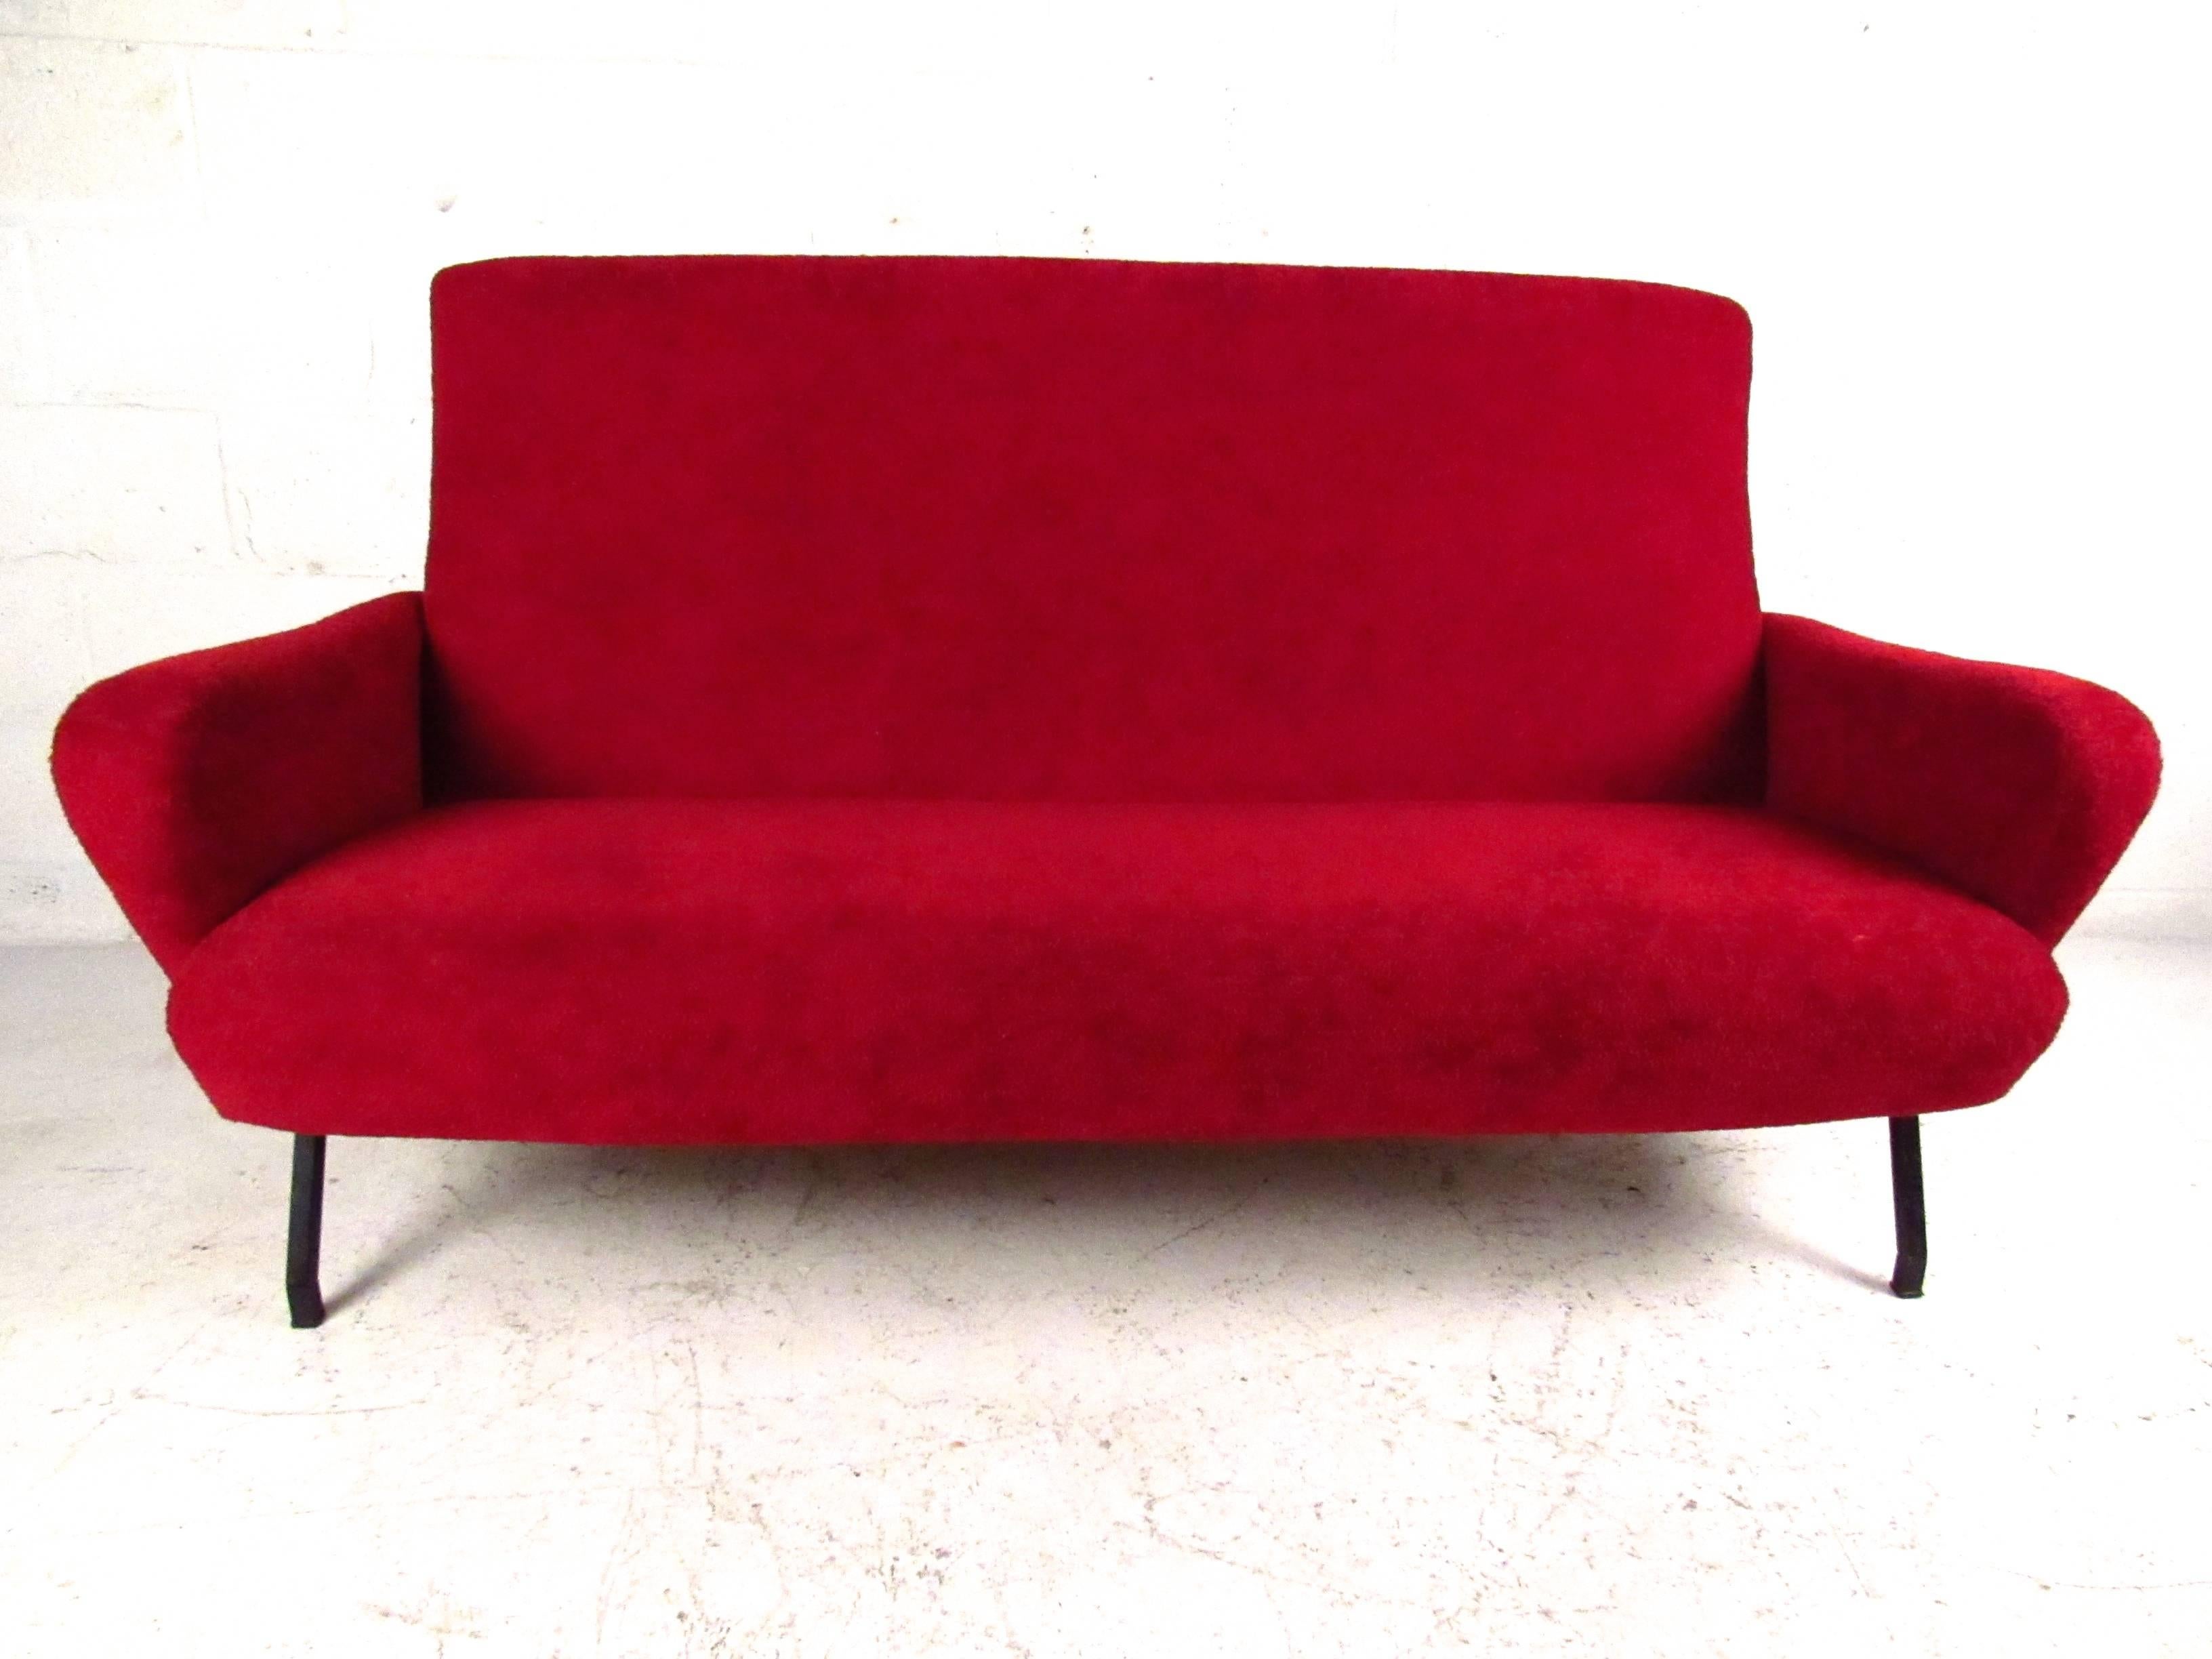 This beautiful Mid-Century sofa features vintage Italian design similar to both Marco Zanuso and Gio Ponti. Sculpted sides and contoured back combine with plush upholstery to make this sofa the perfect addition to any seating arrangement. Please